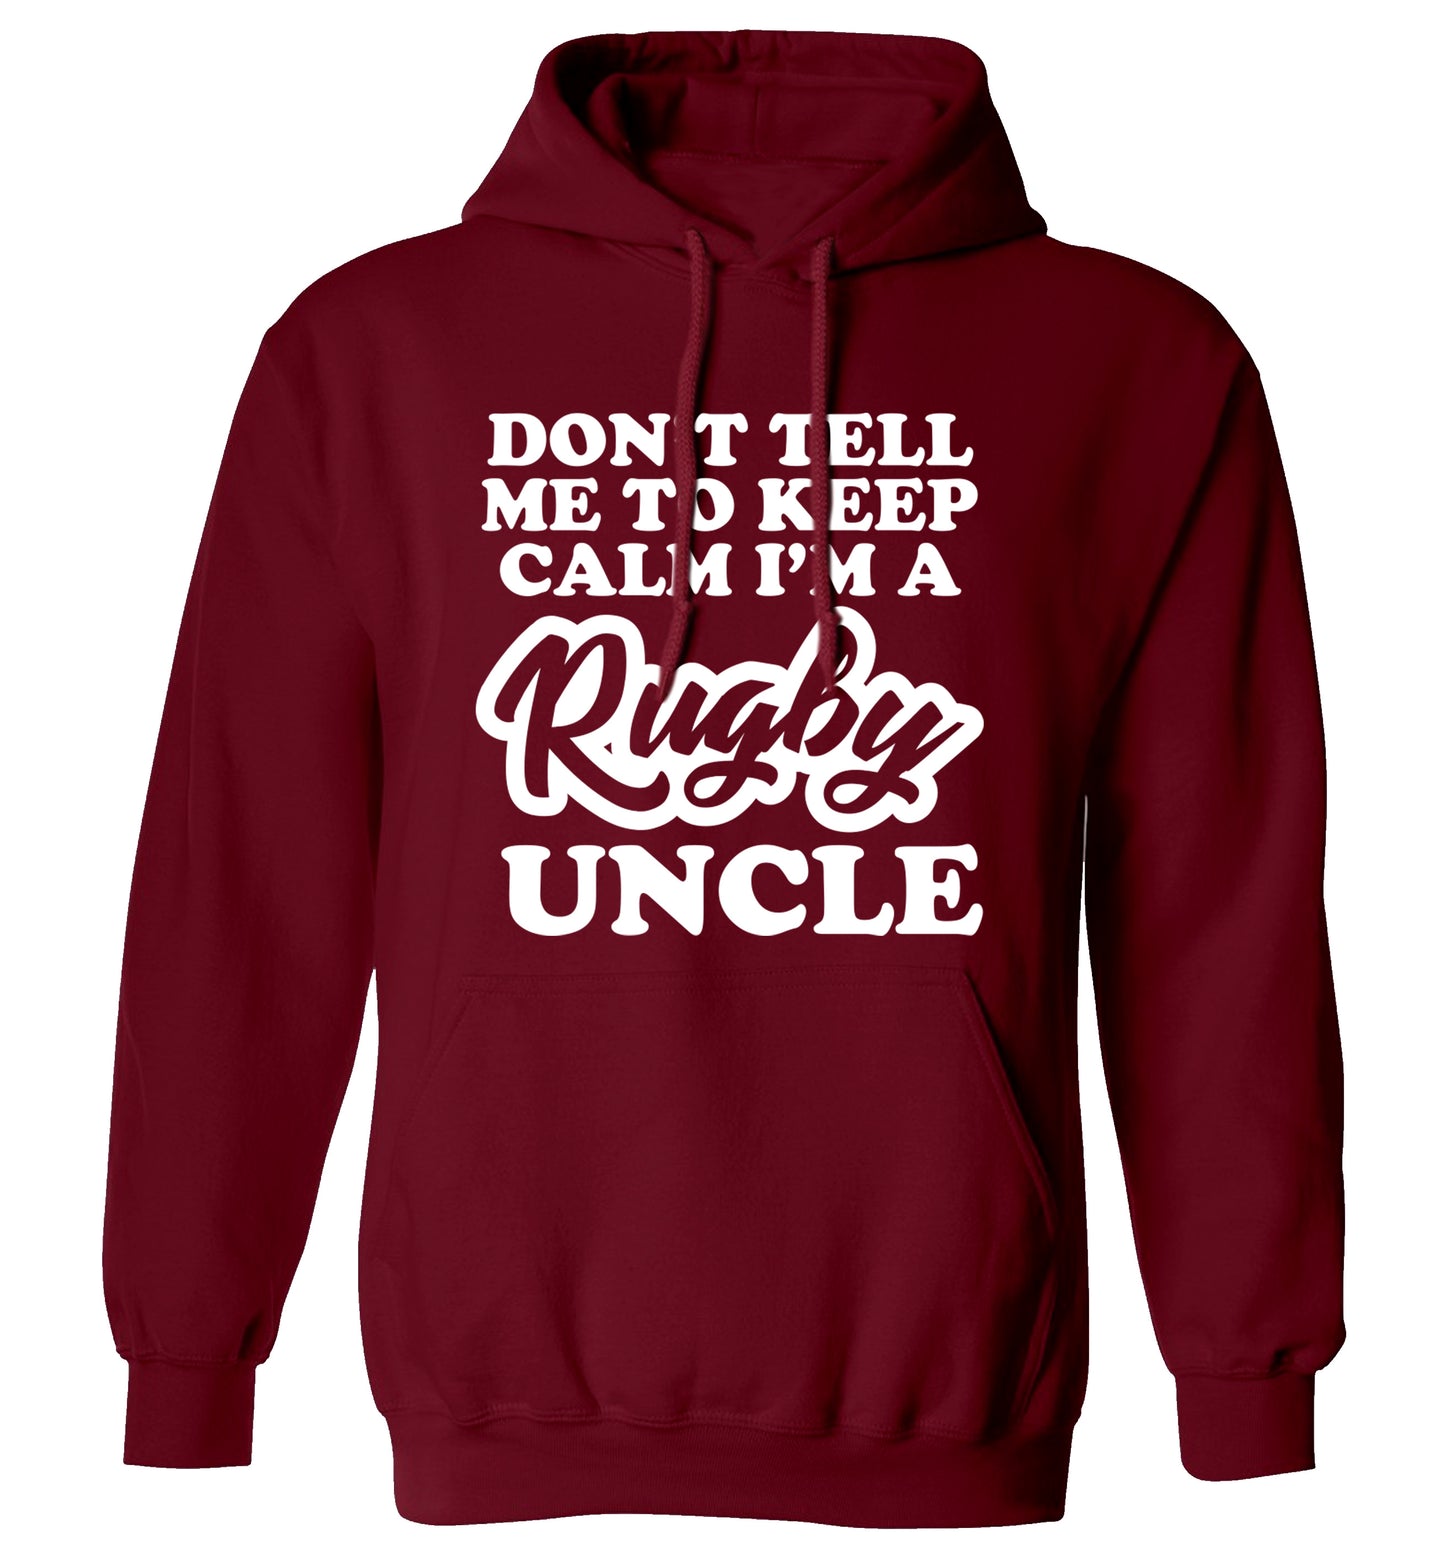 Don't tell me to keep calm I'm a rugby uncle adults unisex maroon hoodie 2XL